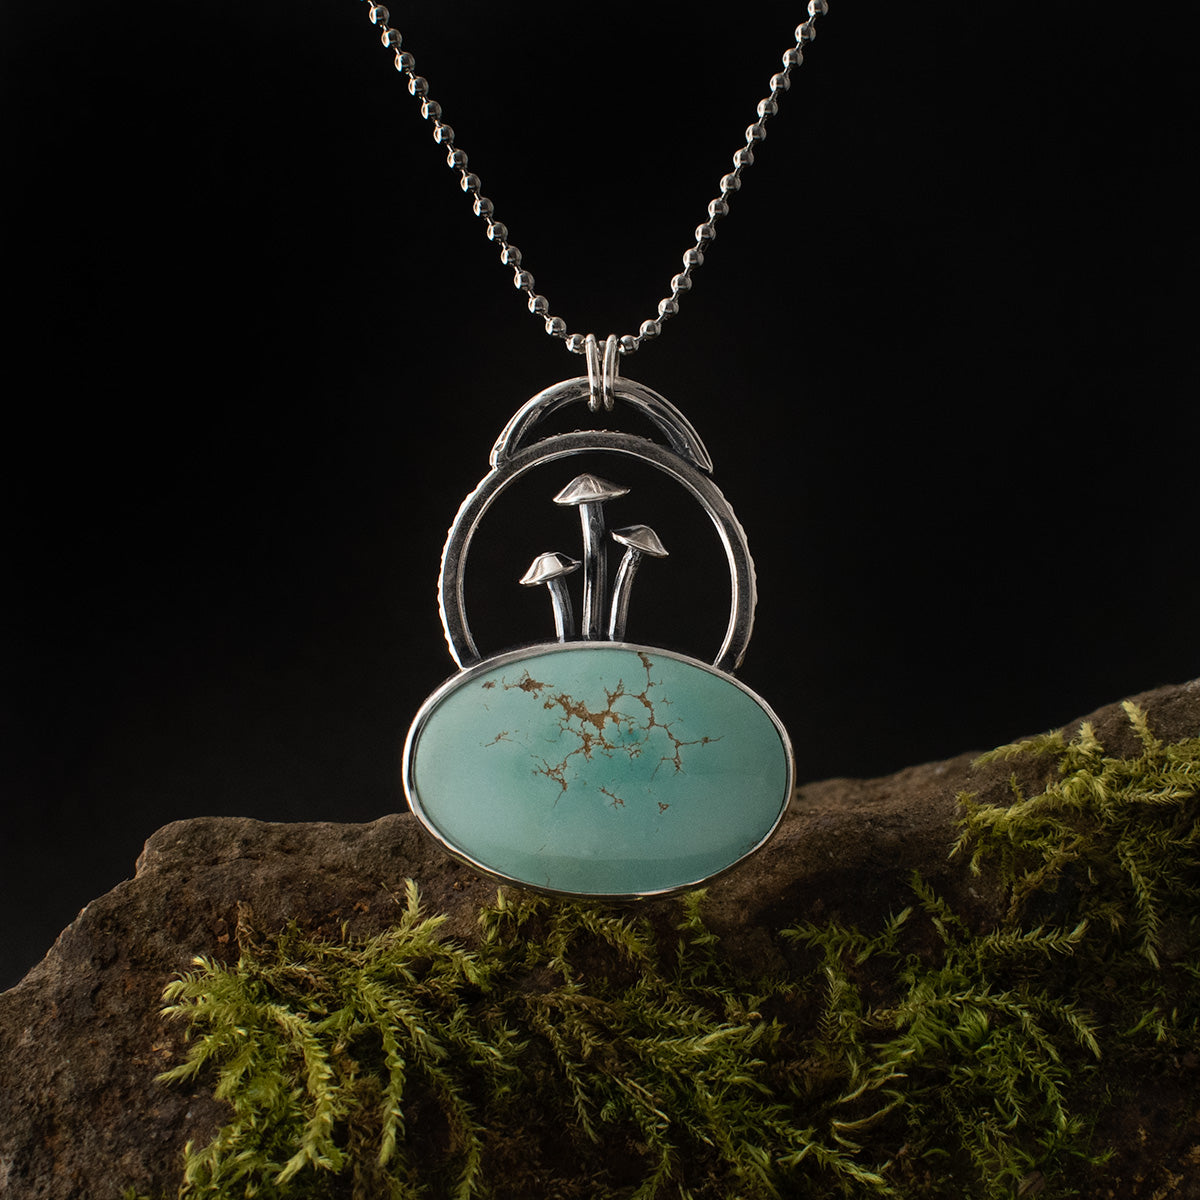 Three miniature mushrooms seem to spring up from this handmade sterling silver pendant’s oval cabochon of turquoise, webbed with tawny inclusions, as loops emerge around and above them.